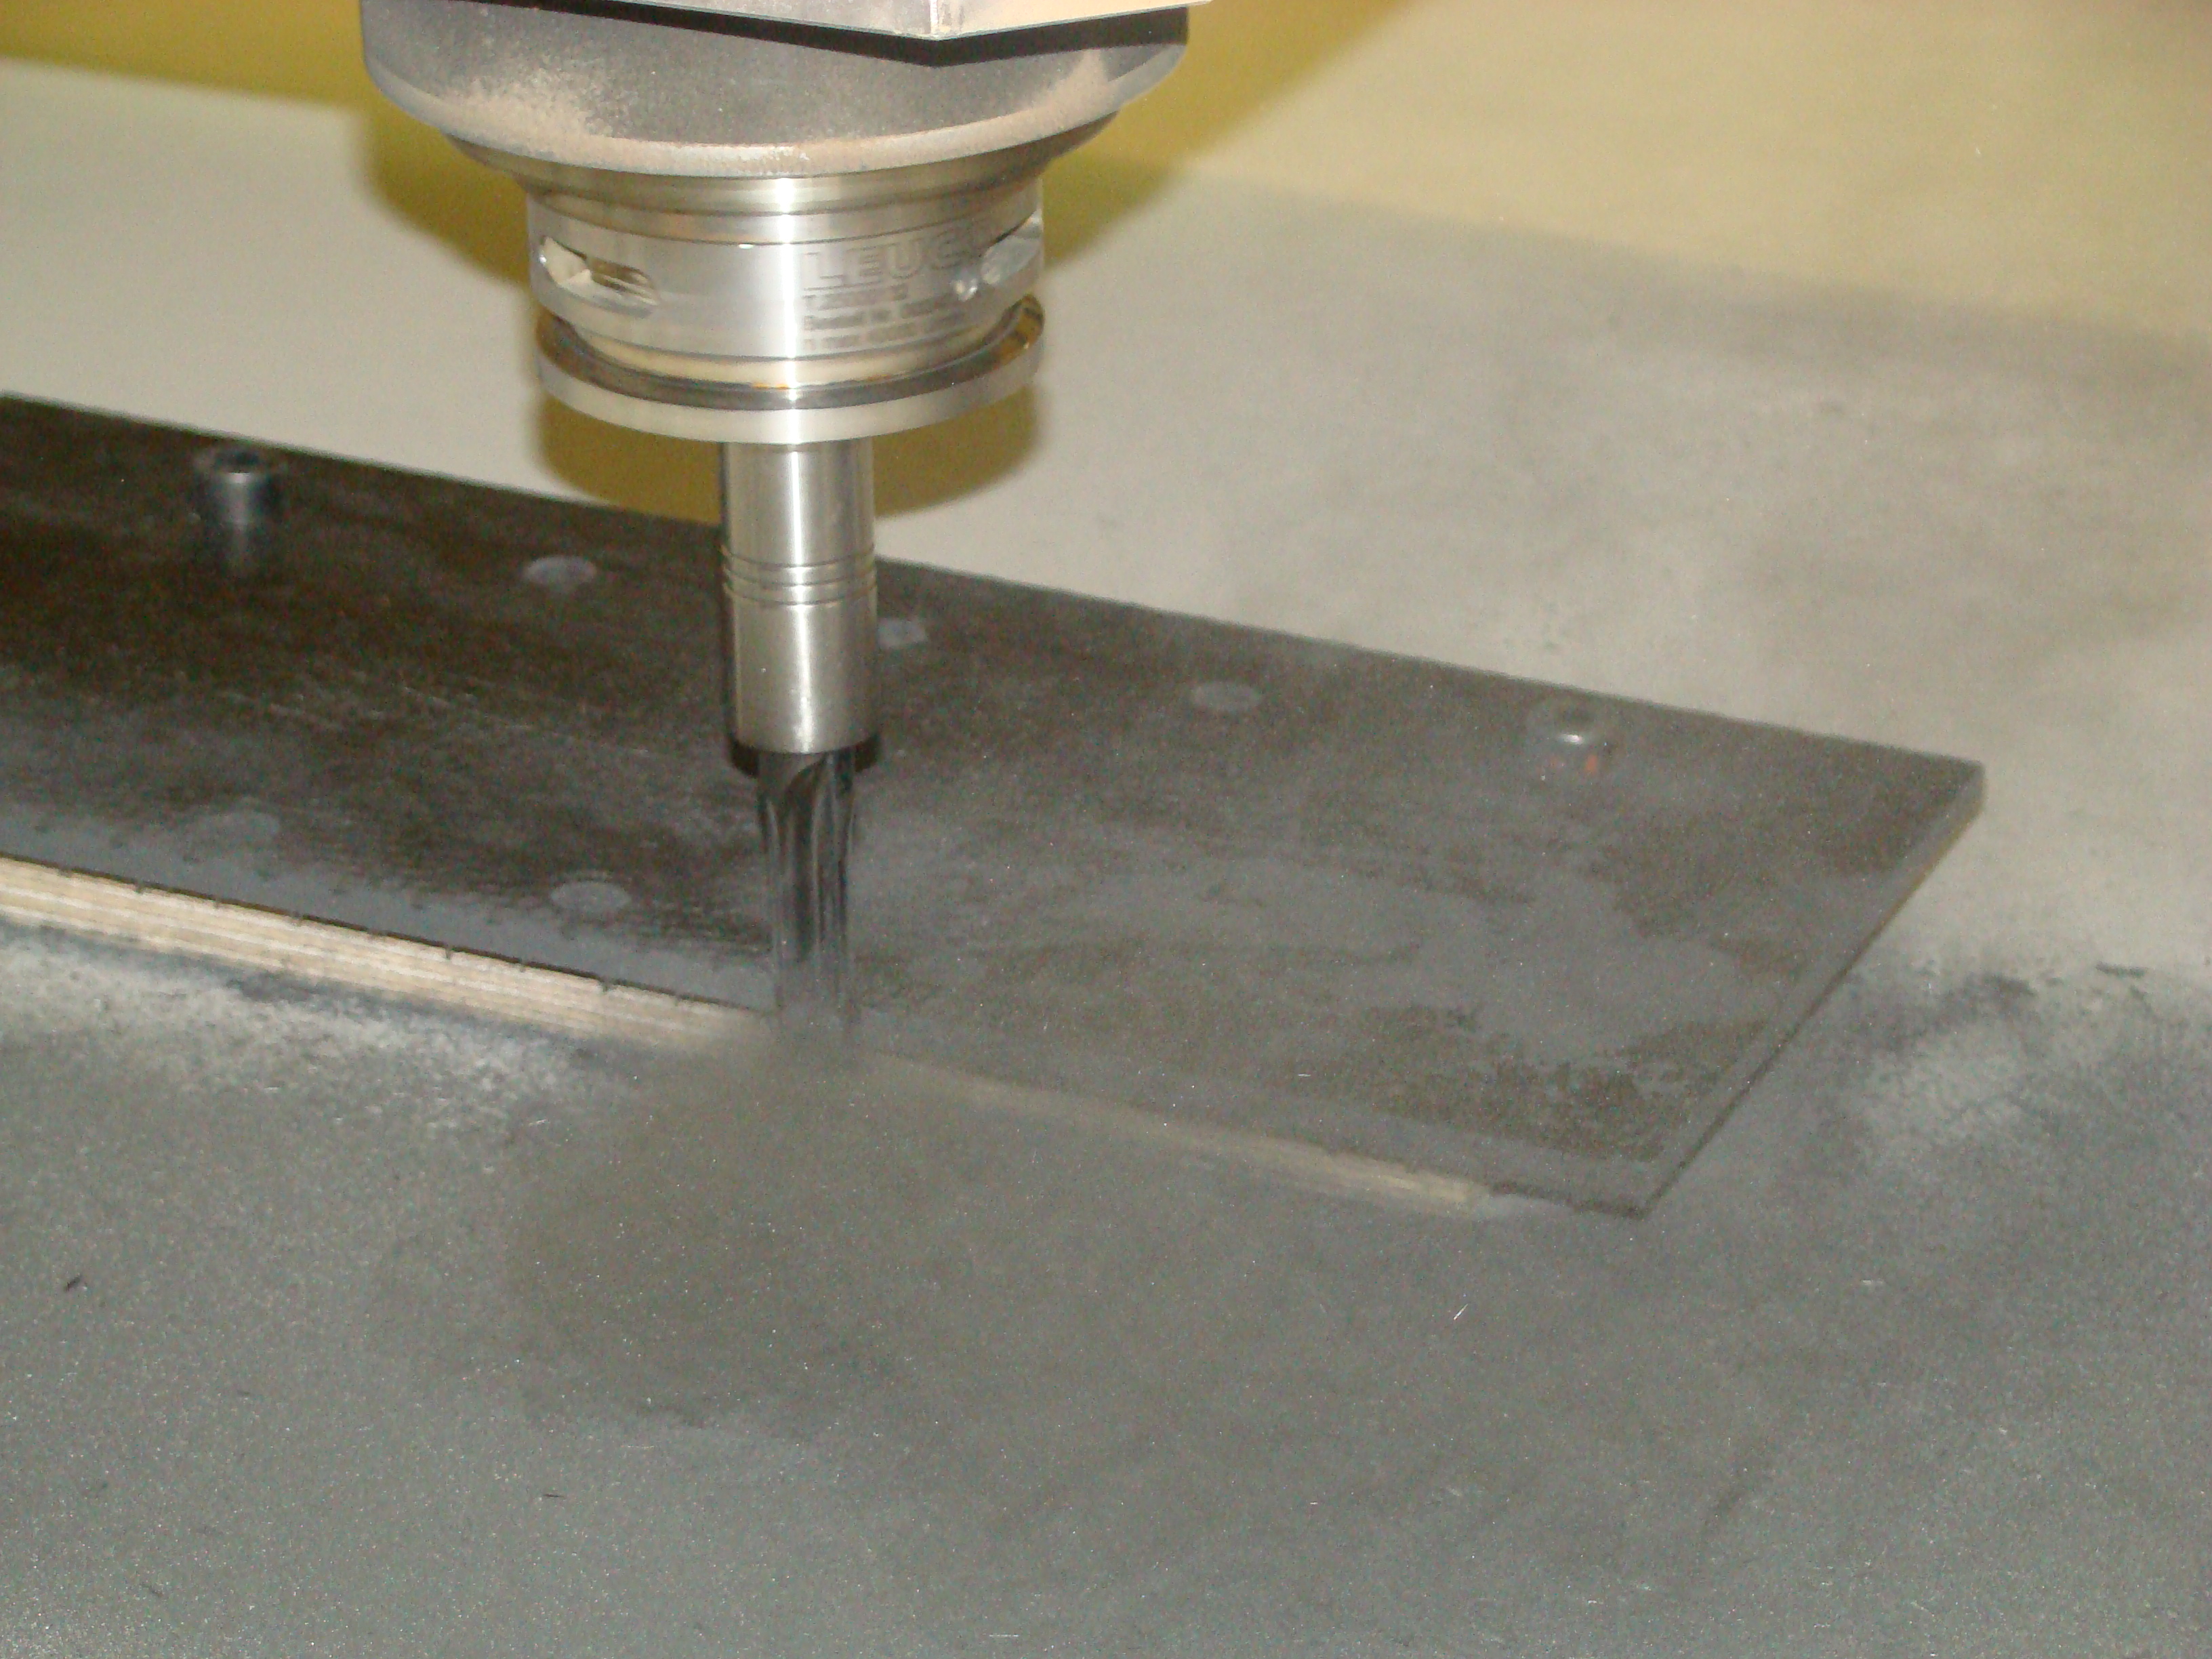 Dust generated during milling of fibre reinforced plastic.